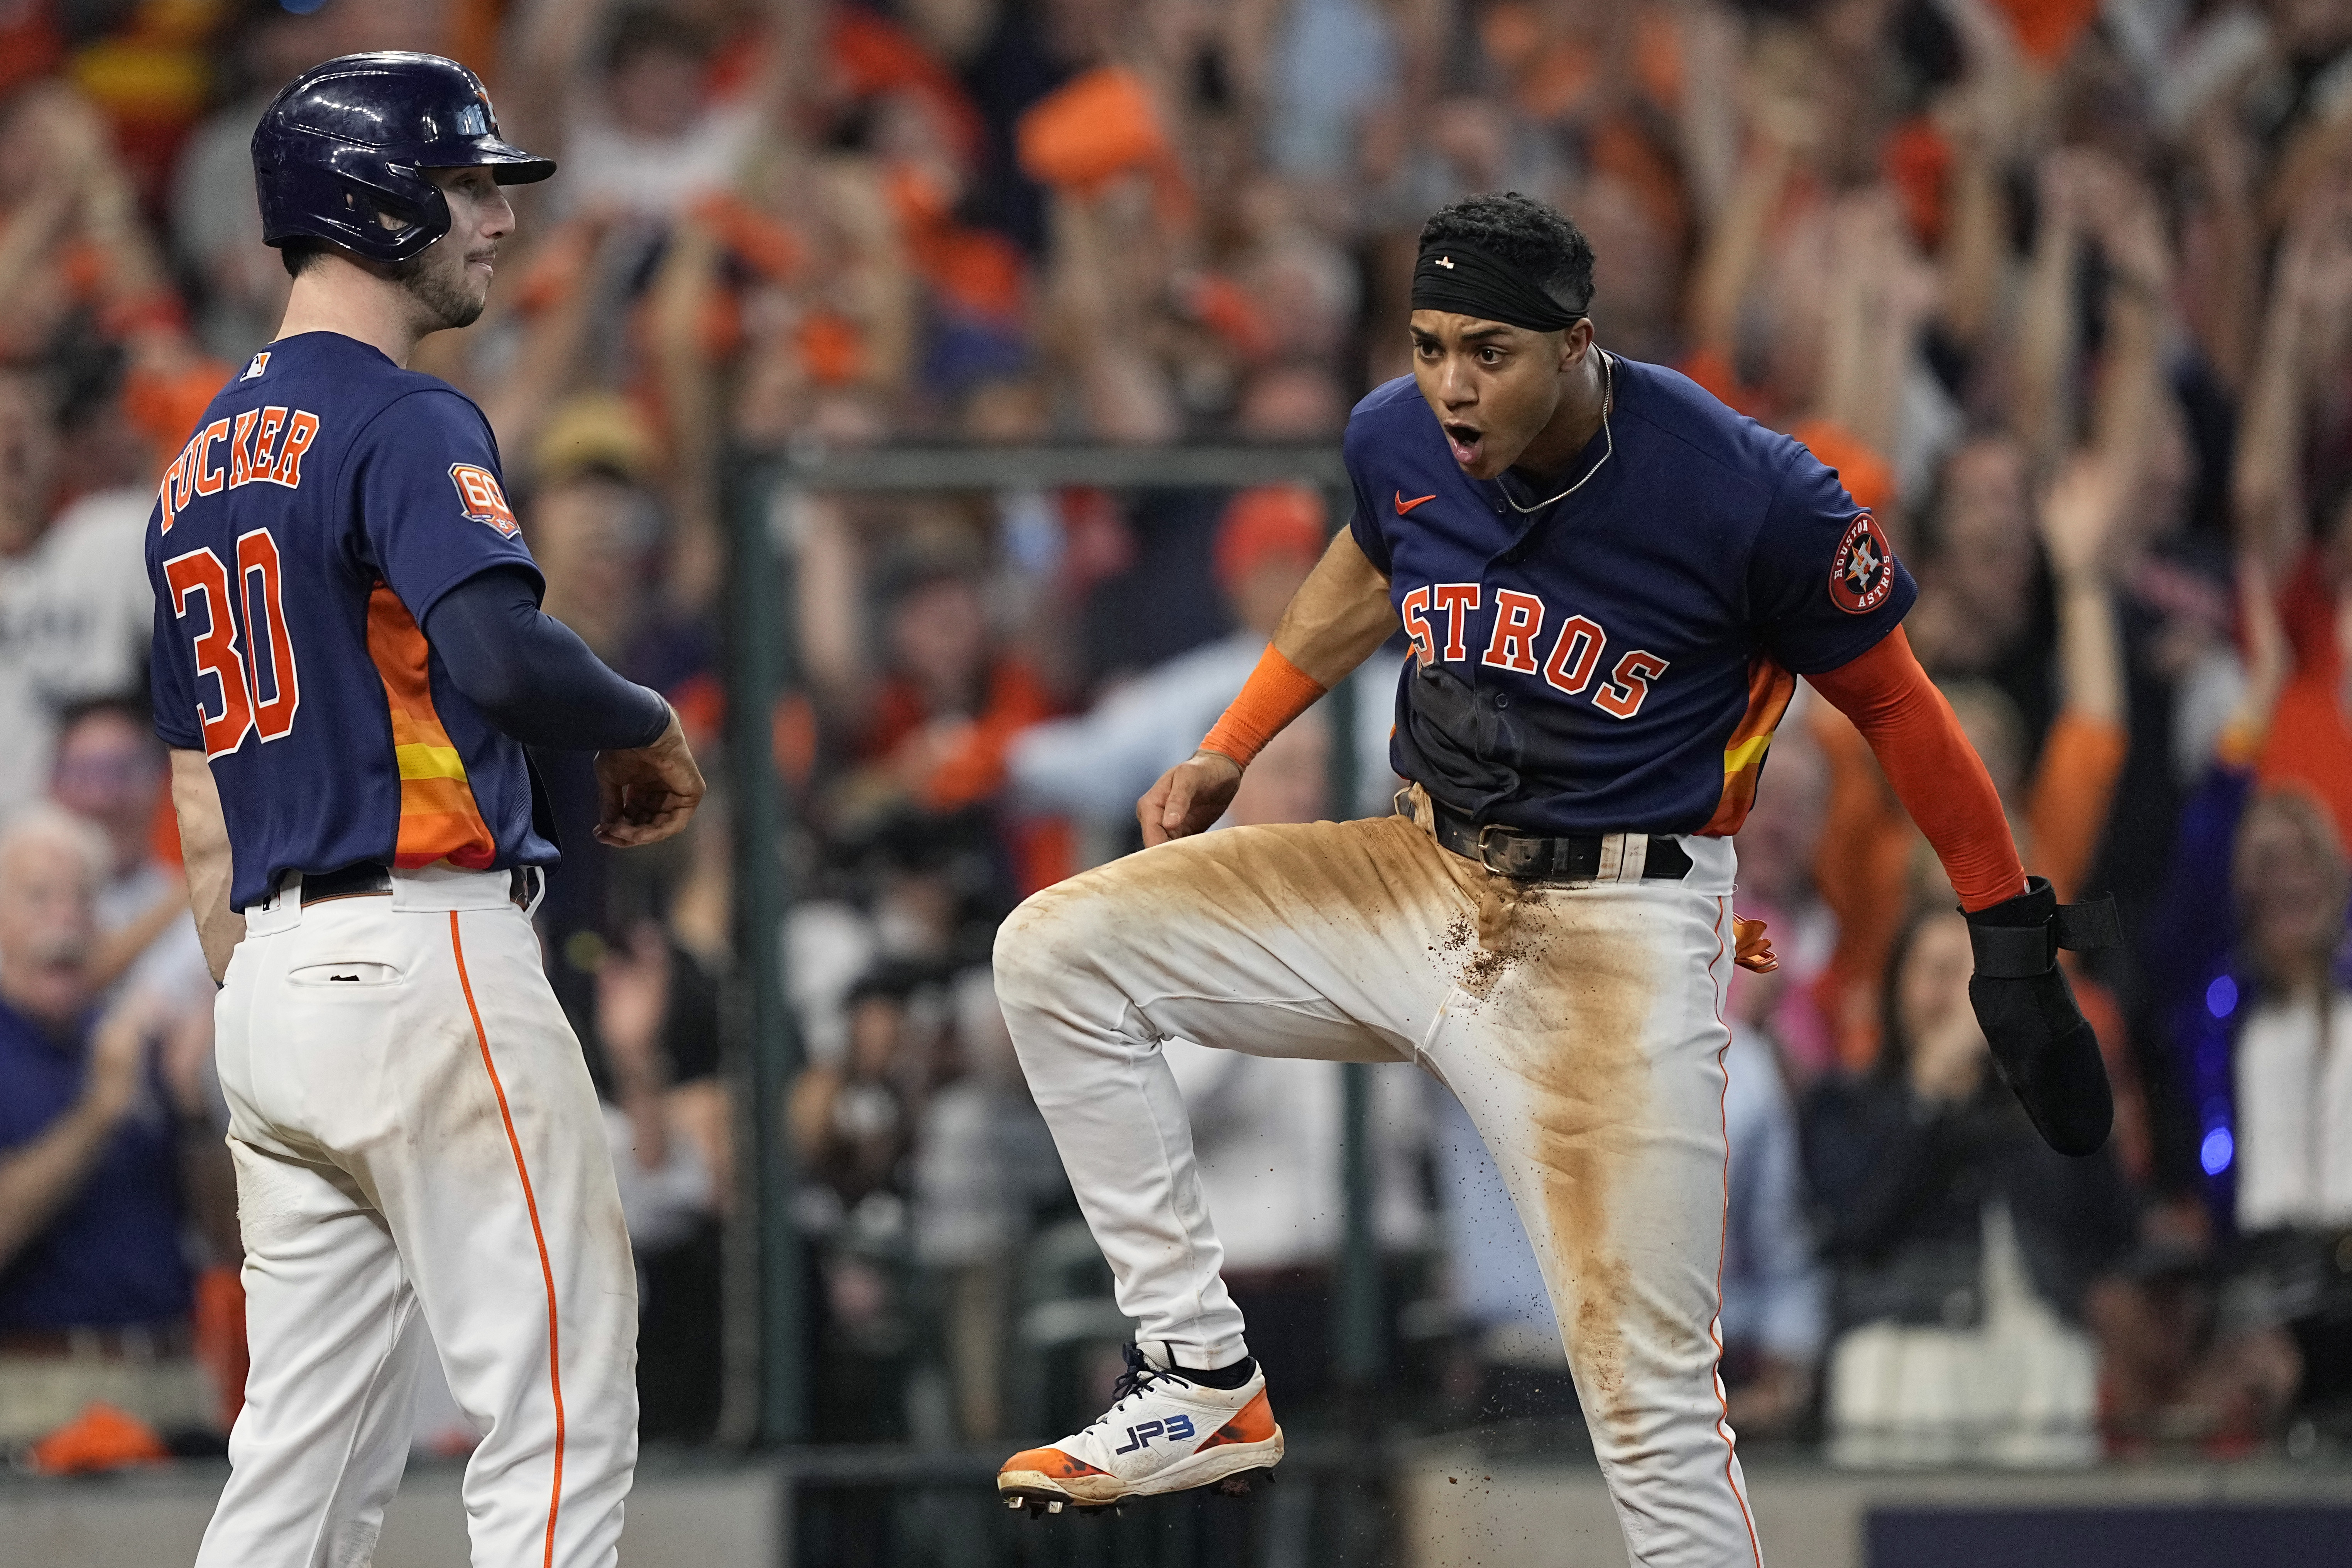 Astros hit 4 homers, with a pair by José Abreu, to rout Twins 9-1